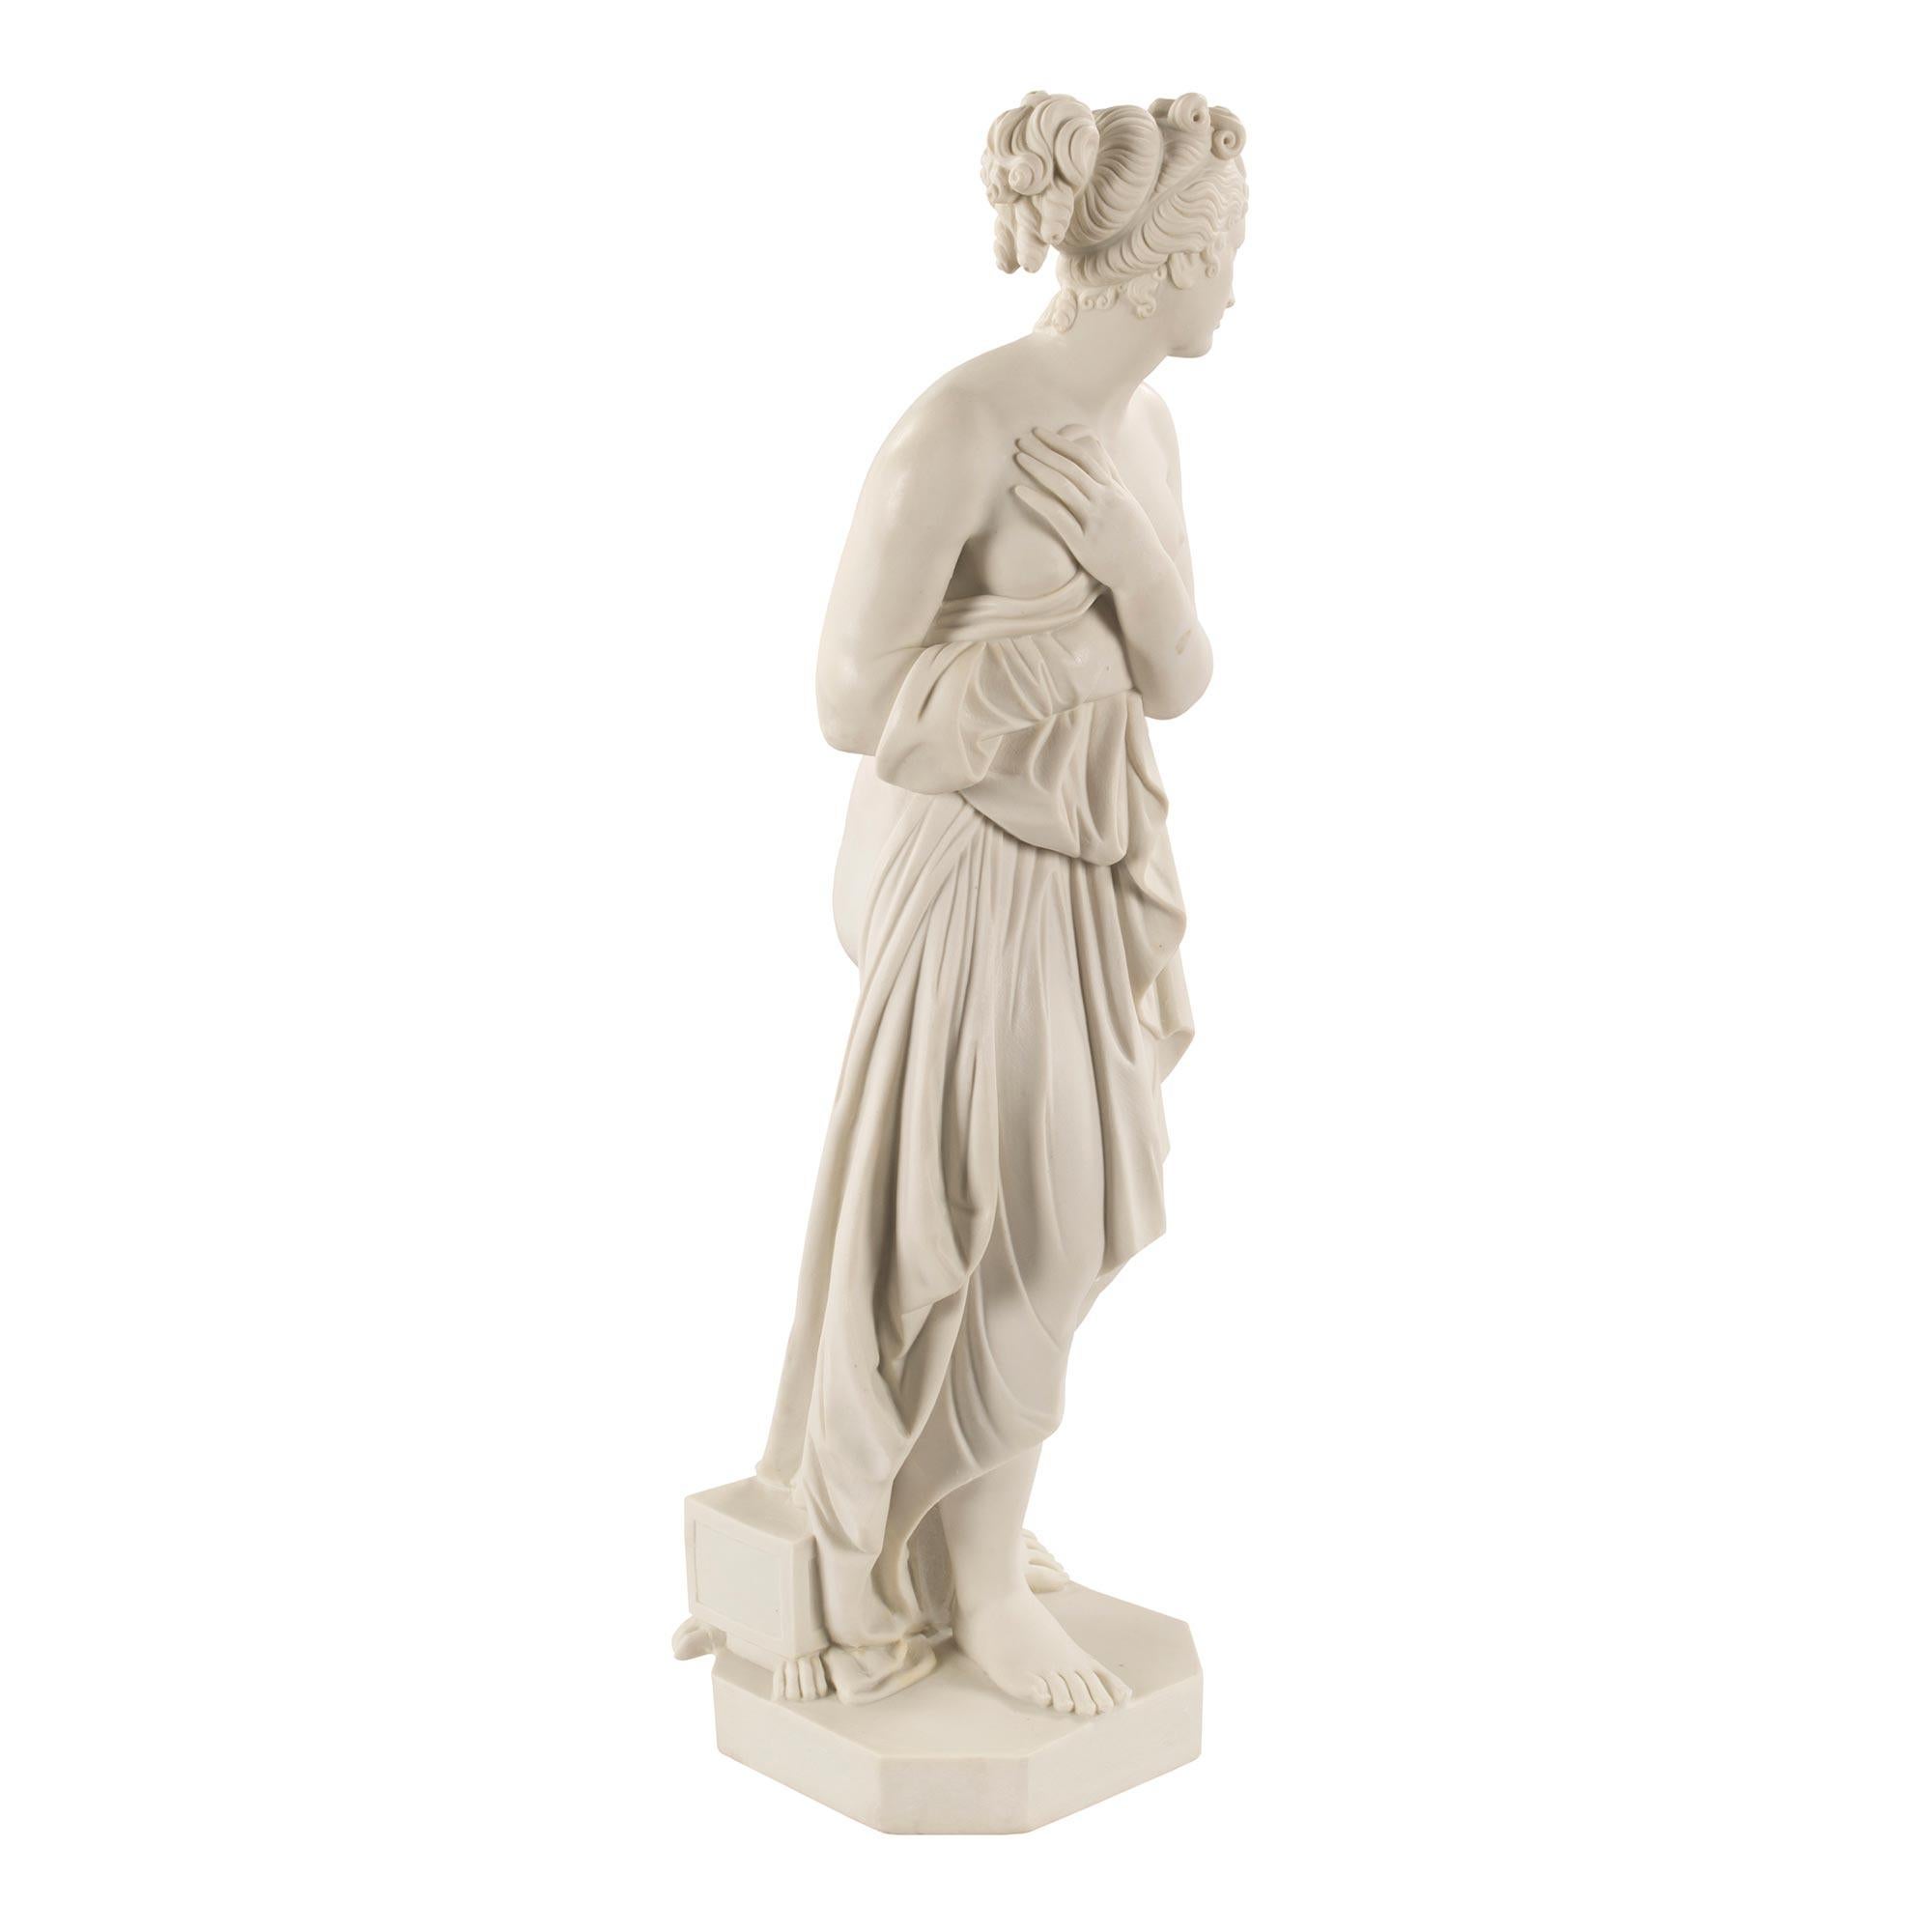 A beautiful Italian 19th century neoclassical style Biscuit de Sèvres statue of Venus. The masterfully sculpted statue is raised by a square base with cut corners. Venus stands with a finely carved box with paw supports at her feet. She is draped in